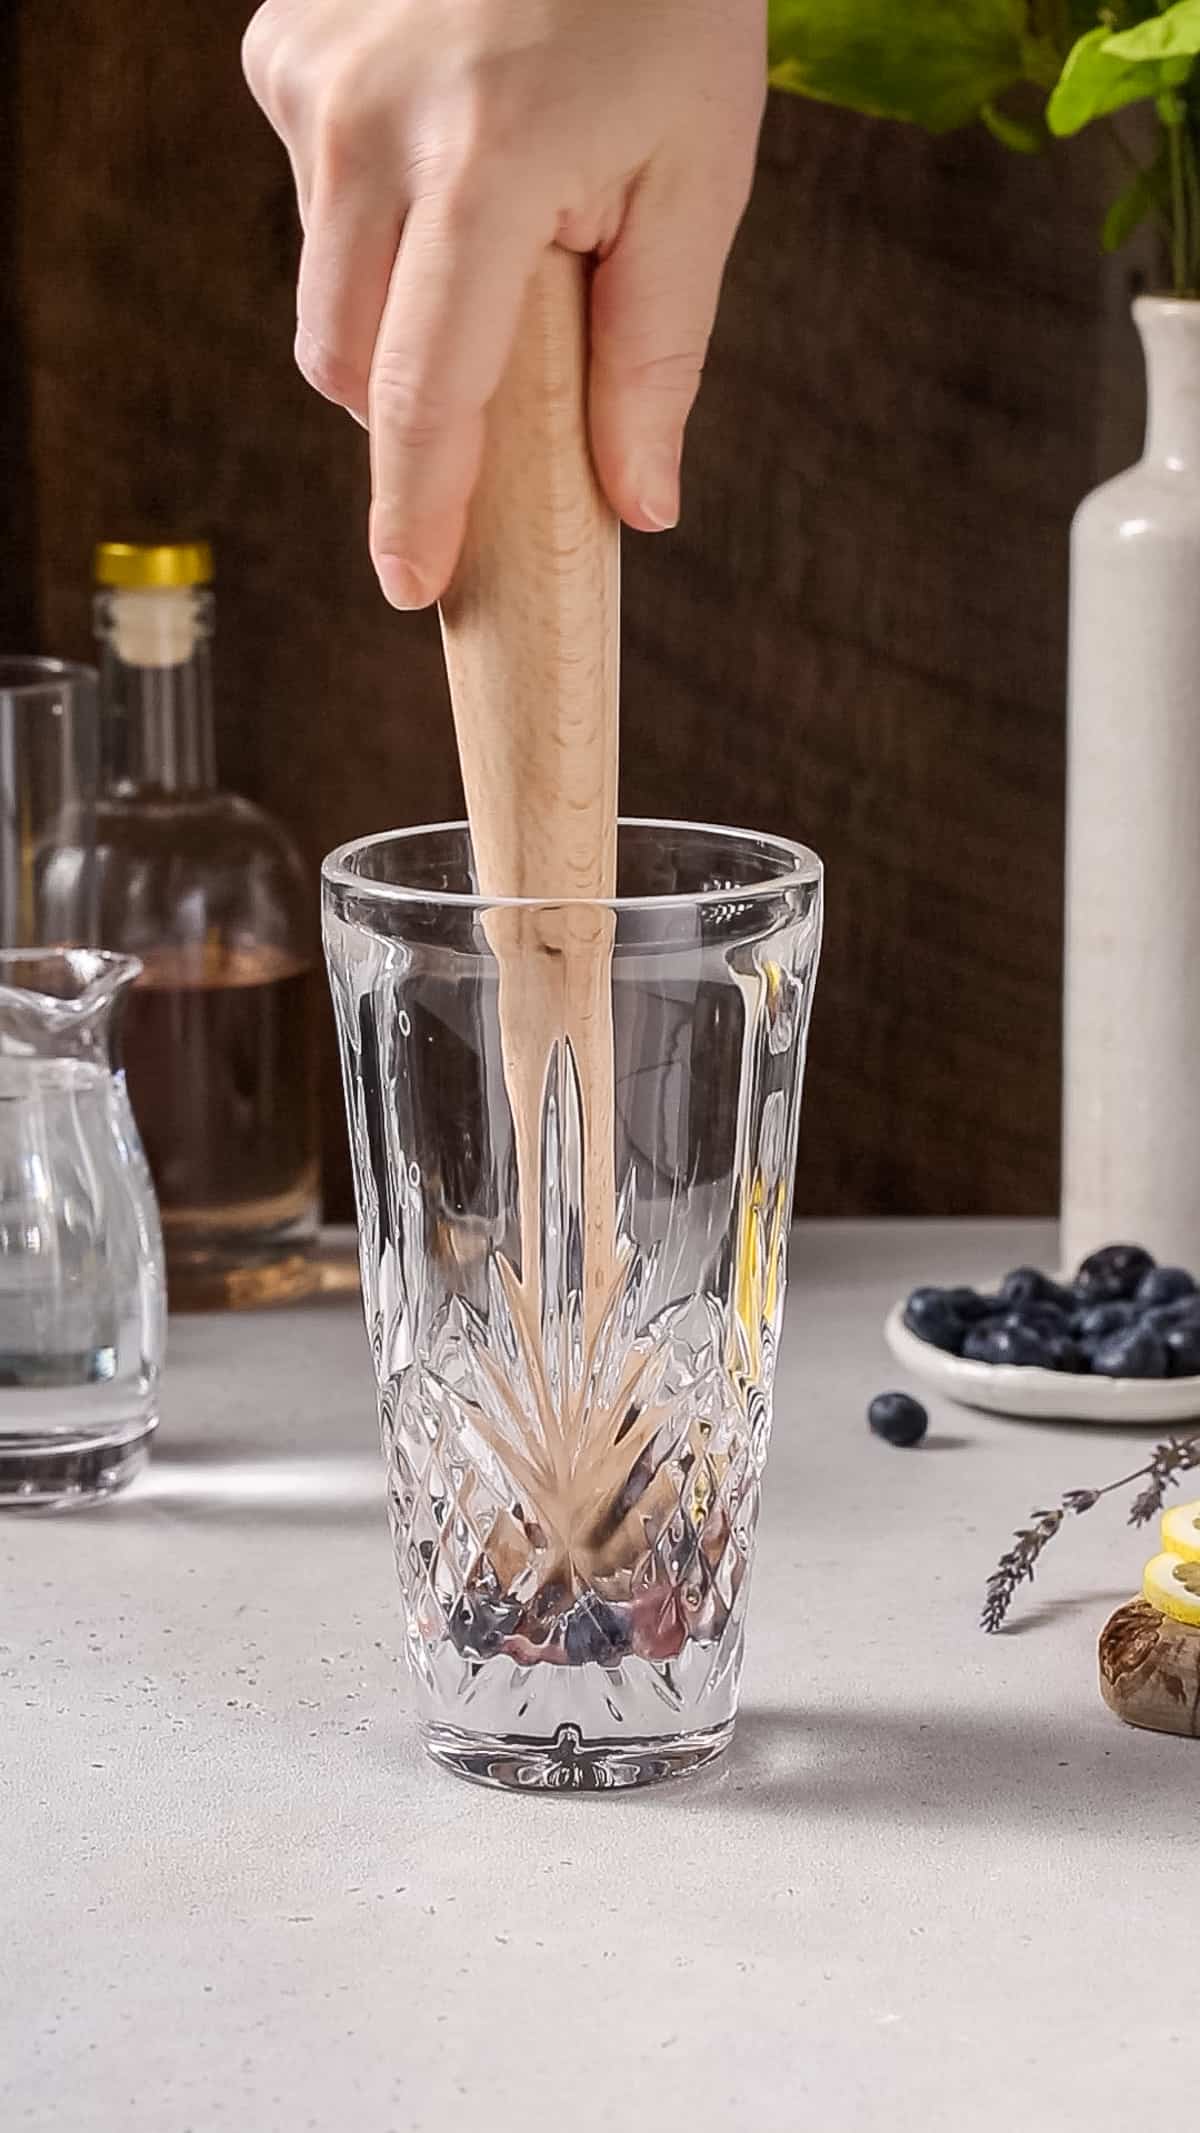 Hand using a wooden mudder to muddle blueberries in a cocktail shaker.